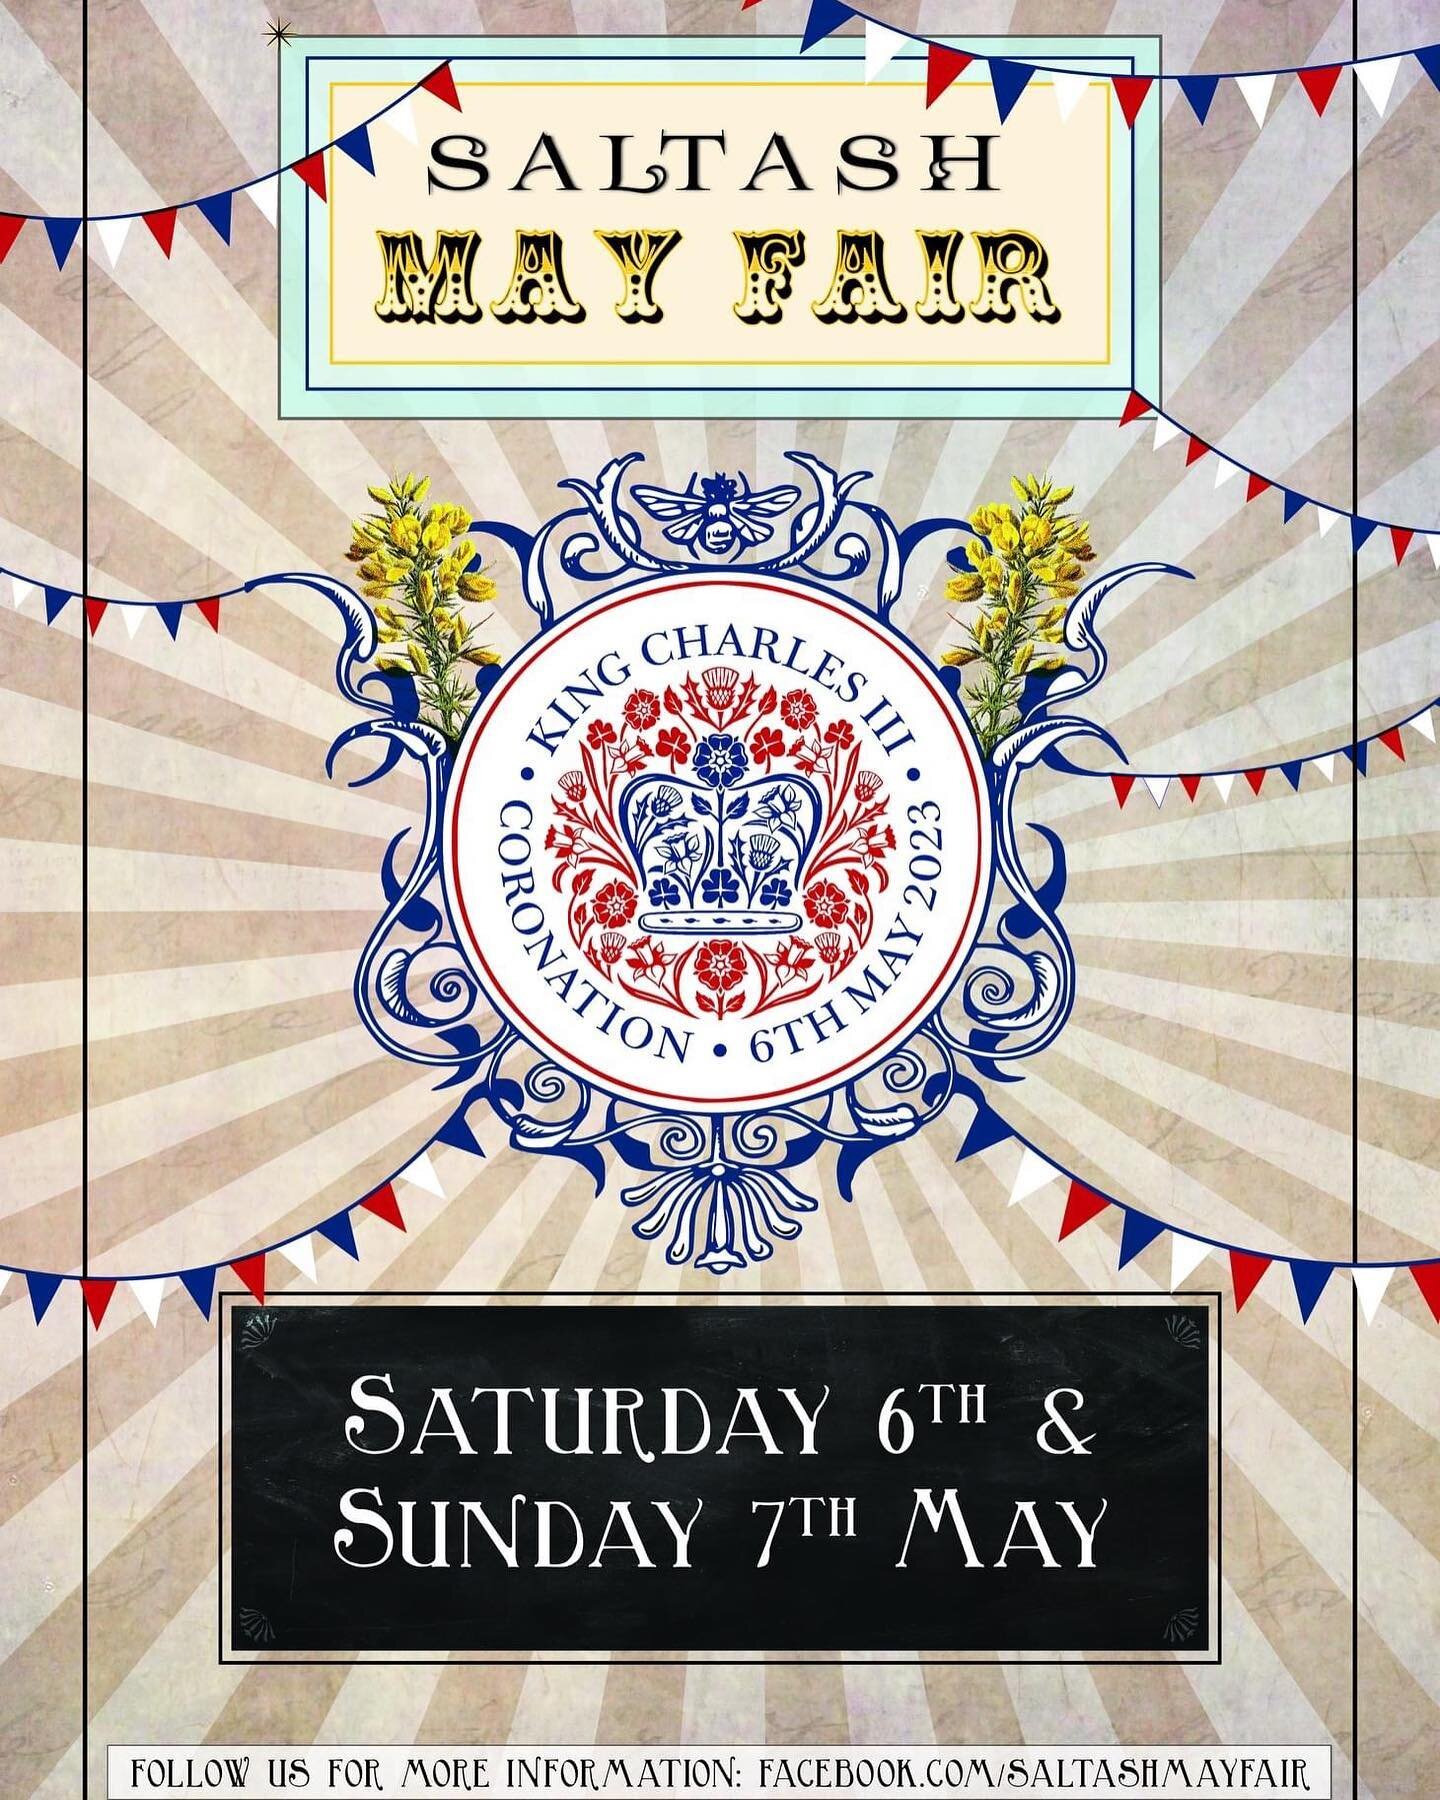 WE'RE COMING!!

We have some super exciting news to share, we will be appearing at Saltash May Fair on the 6th and 7th of May! We'll be there to serve all you lovely people all the local Beer, Cider and Ales that you come to expect from us! You'll fi